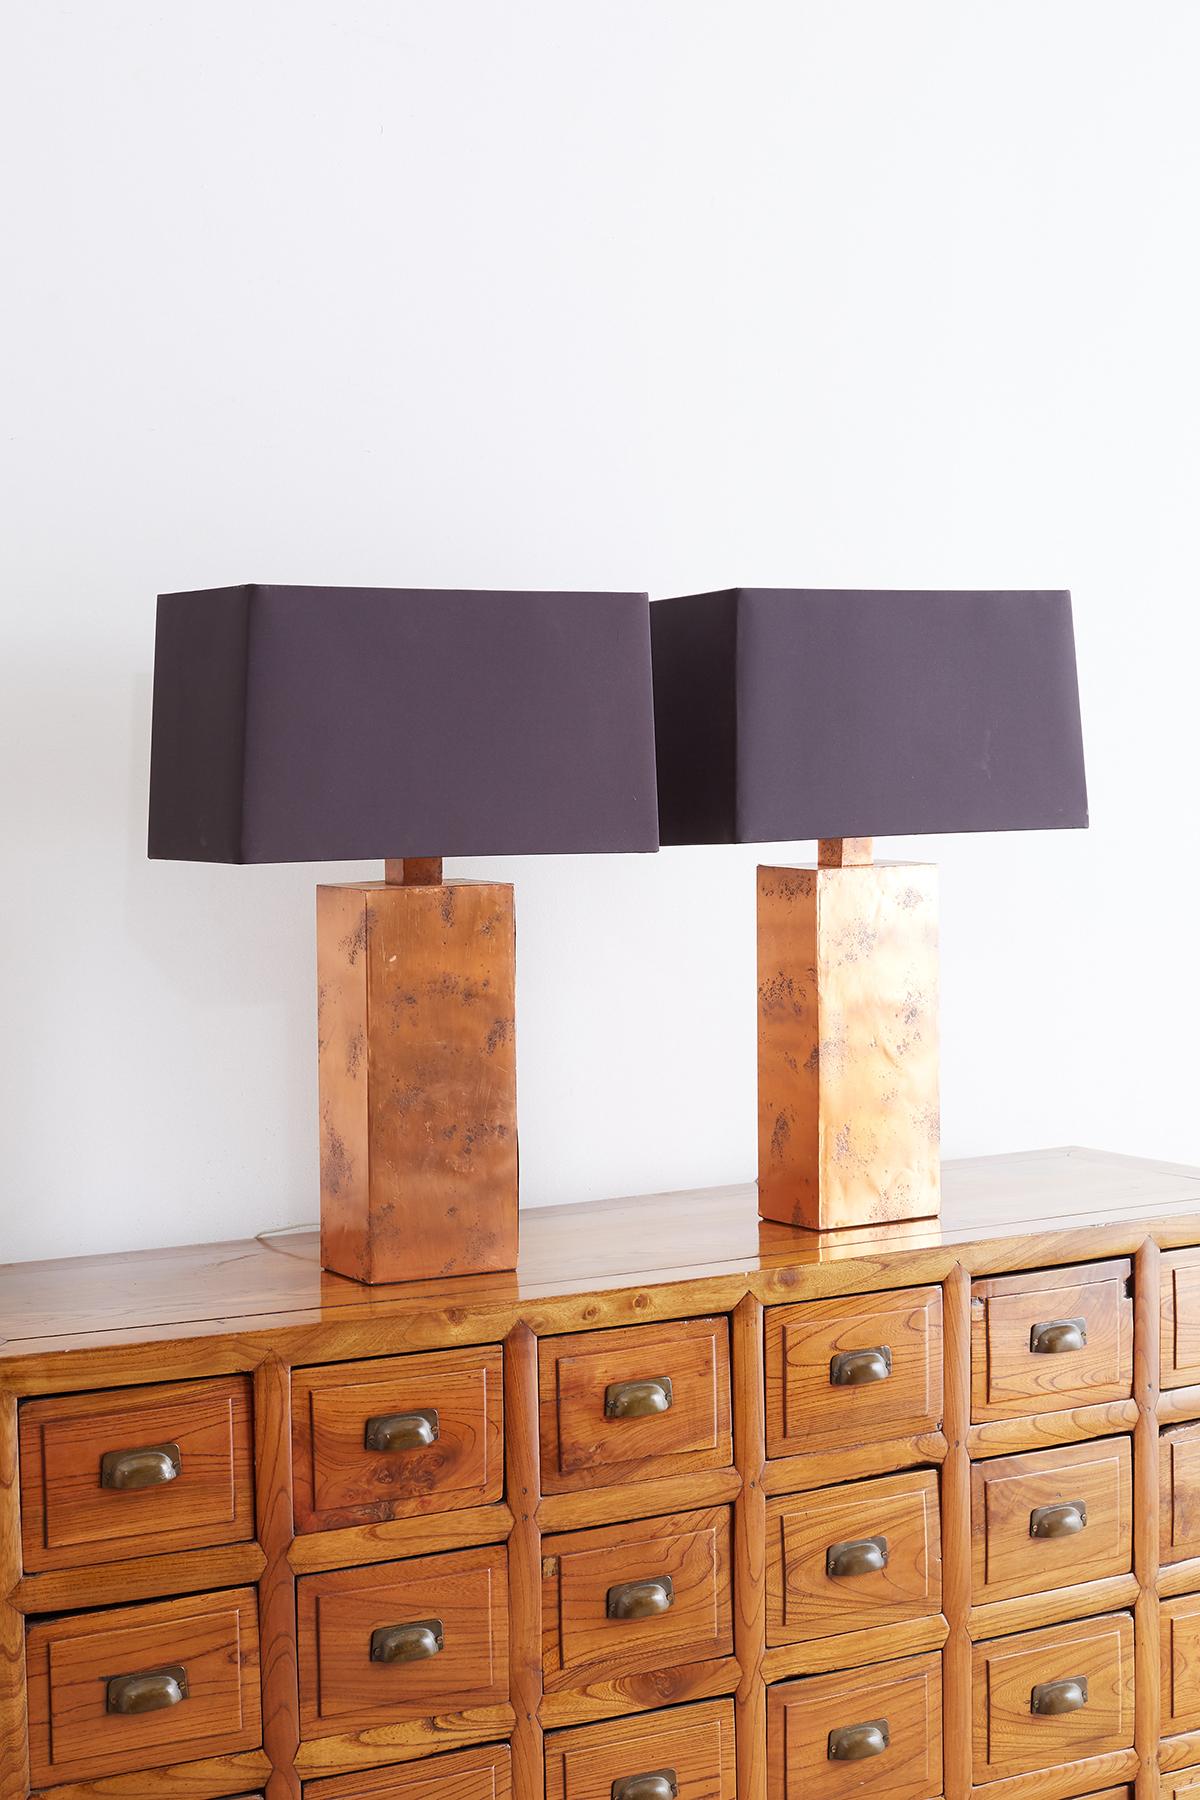 Stunning pair of table lamps by Arteriors Tanner Kenzie line of lighting. Features rectangular forms covered with copper having a lovely patinated metal patina. Includes original black fabric shades with a gilt interior. Unique modern style with a